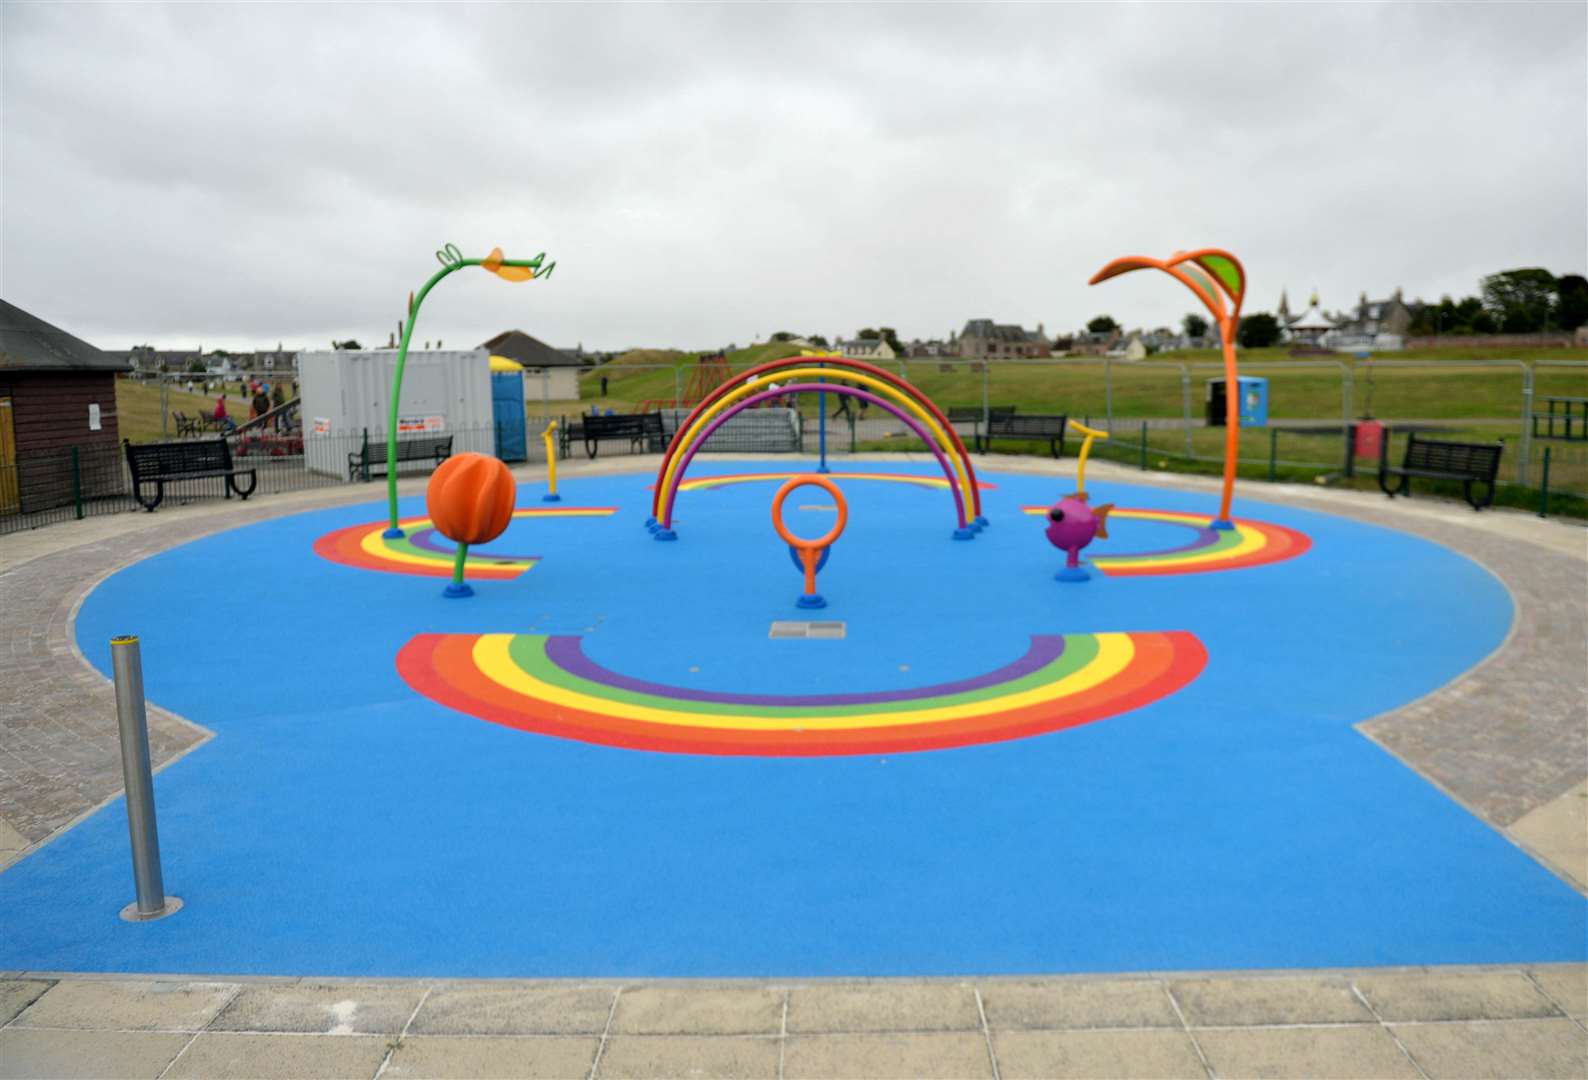 The water play area was part-funded by the town's Team Hamish charity.